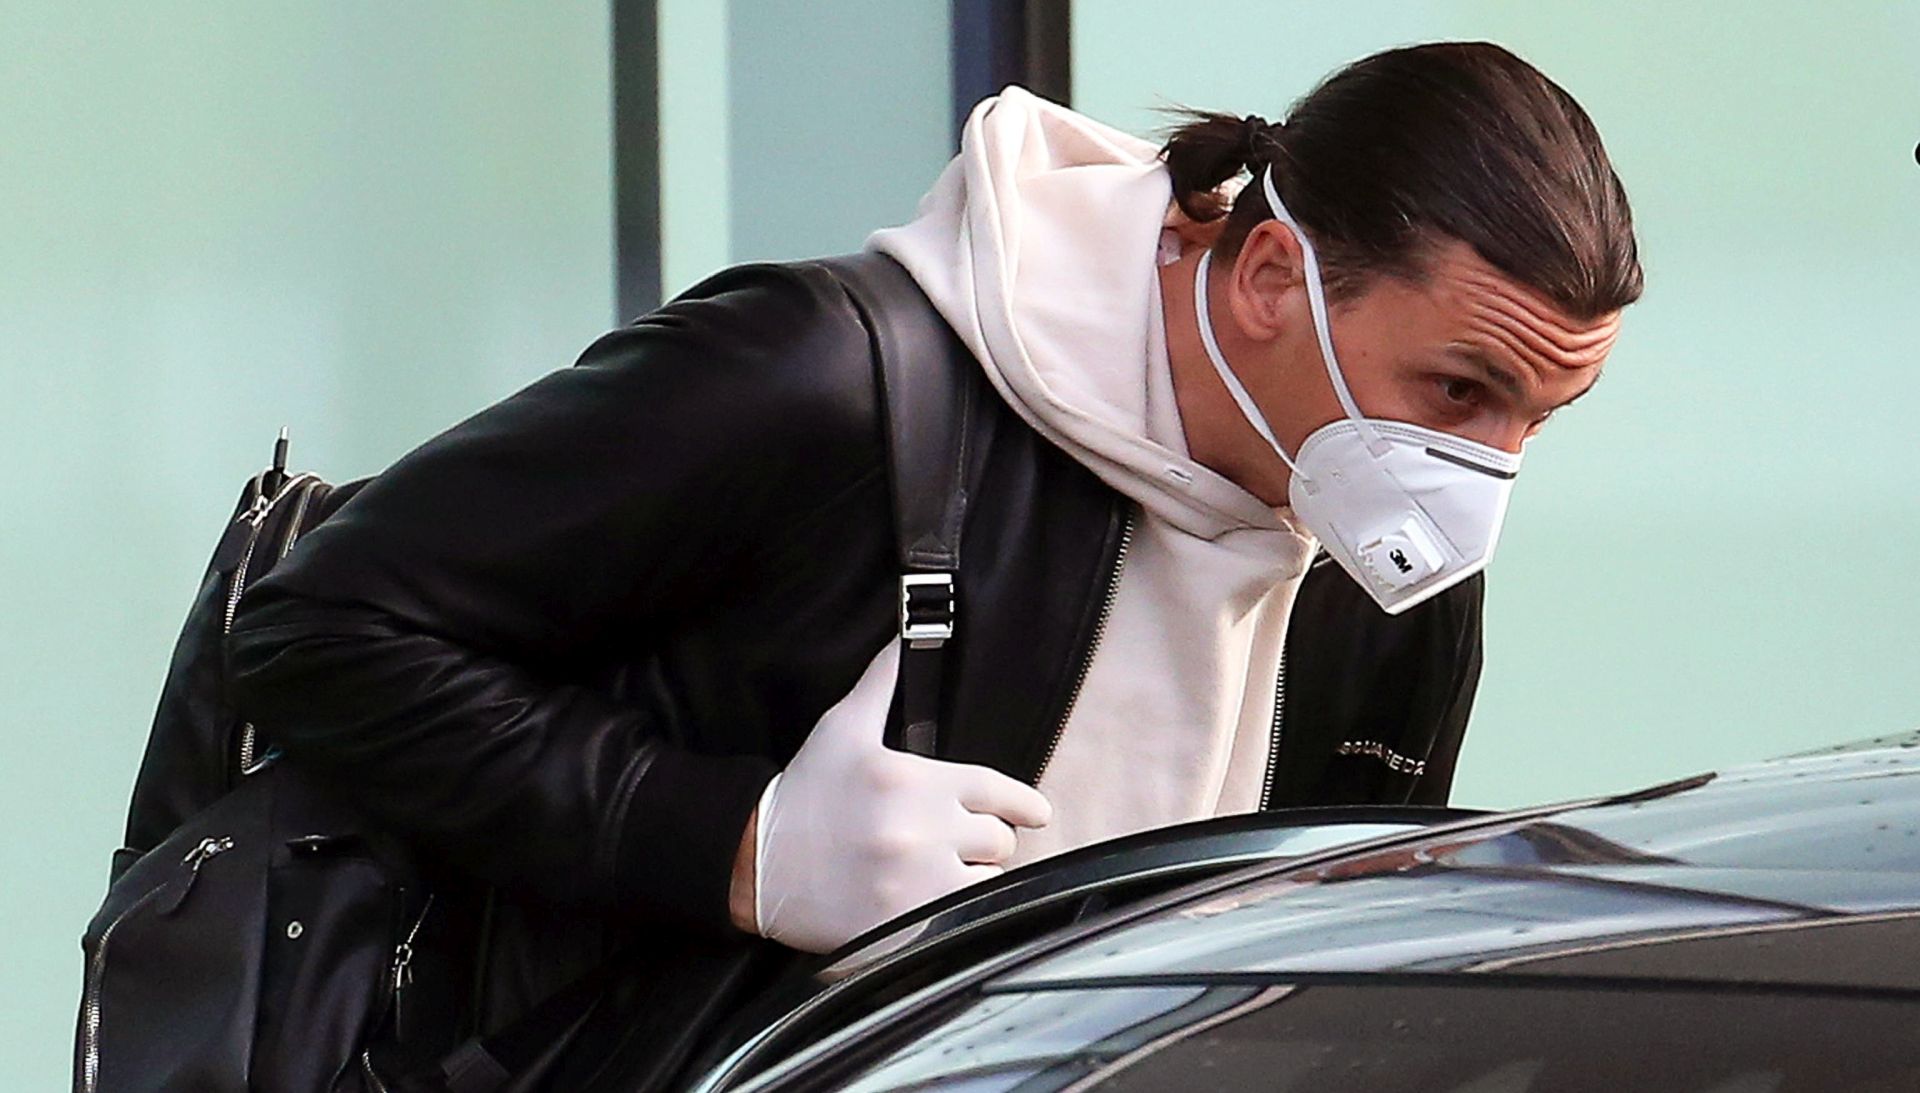 epa08415593 AC Milan's Swedish striker Zlatan Ibrahimovic wearing a protective face mask arrives at Malpensa airport in Milan, Italy, 11 May 2020, amid the ongoing coronavirus COVID-19 pandemic. Ibrahimovic will stay under quarantine at the Milanello sports center, where he will train in individual mode in the absence of his teammates. Ibrahimovic has spent the past two months in Sweden, where he trained at Swedish soccer club Hammarby IF, which he co-owns.  EPA/MATTEO BAZZI